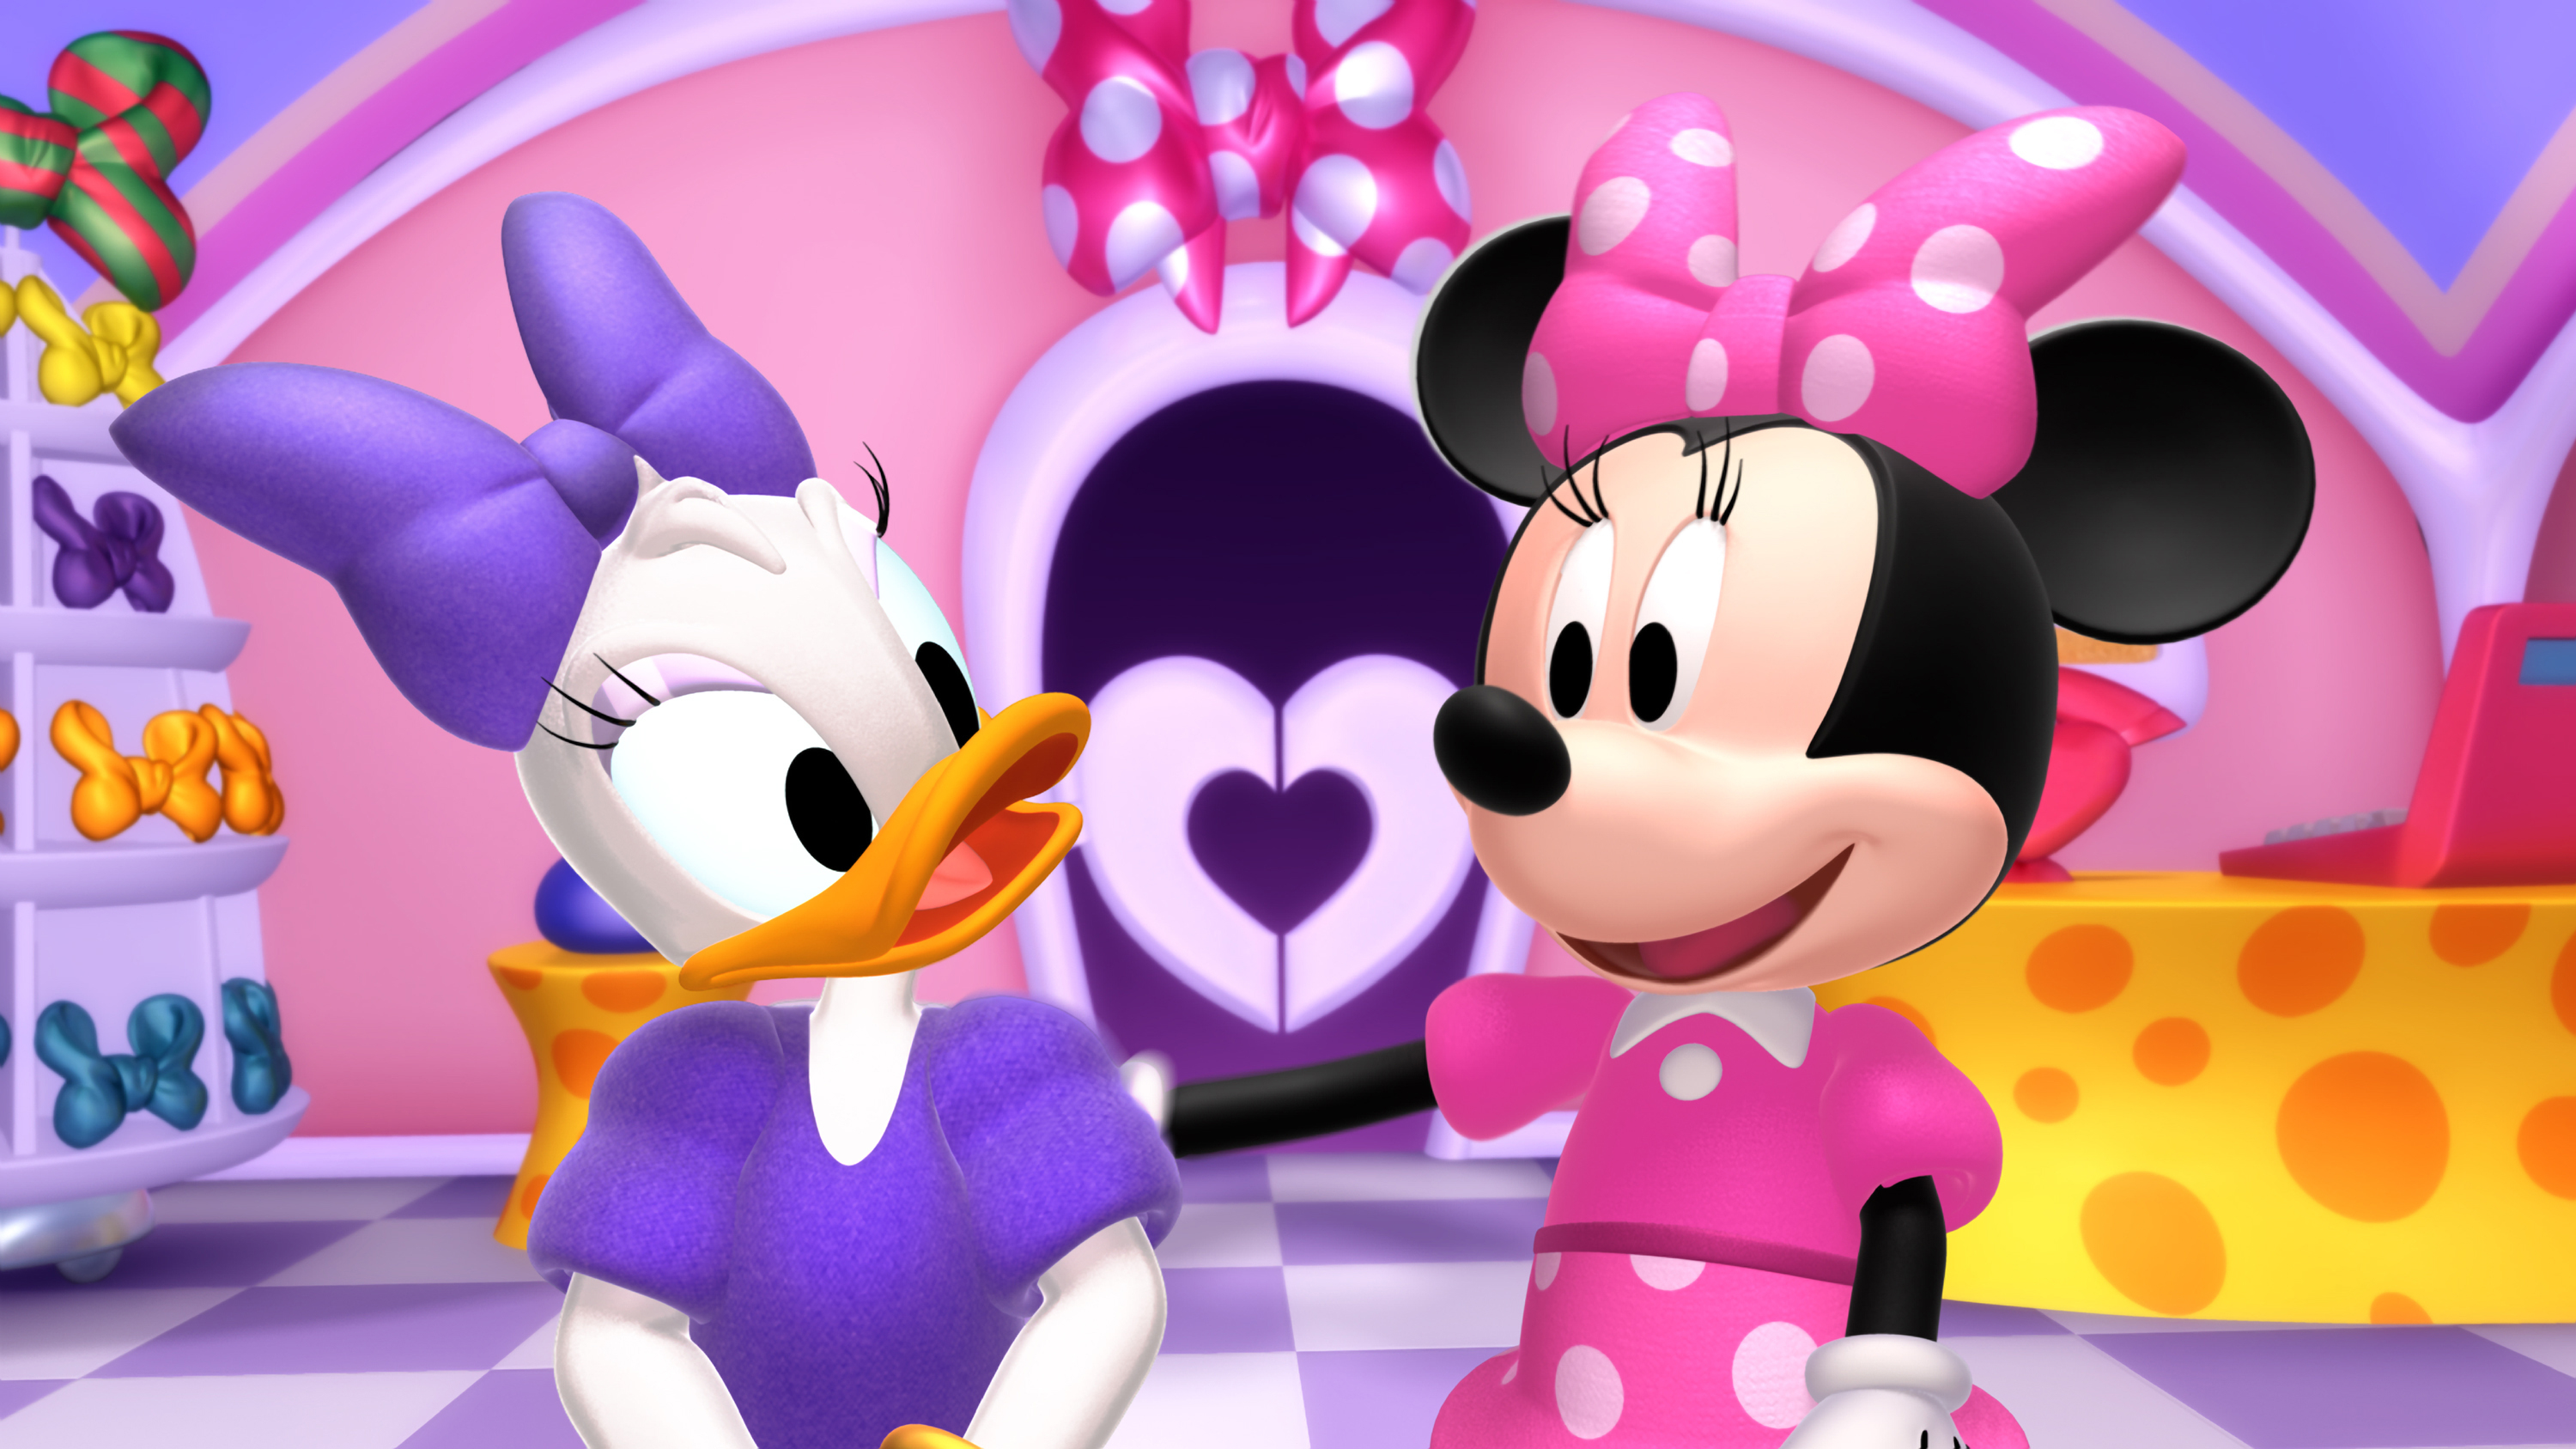 Animated characters Daisy Duck and Minnie Mouse standing in a colorful cartoon room with heart decorations